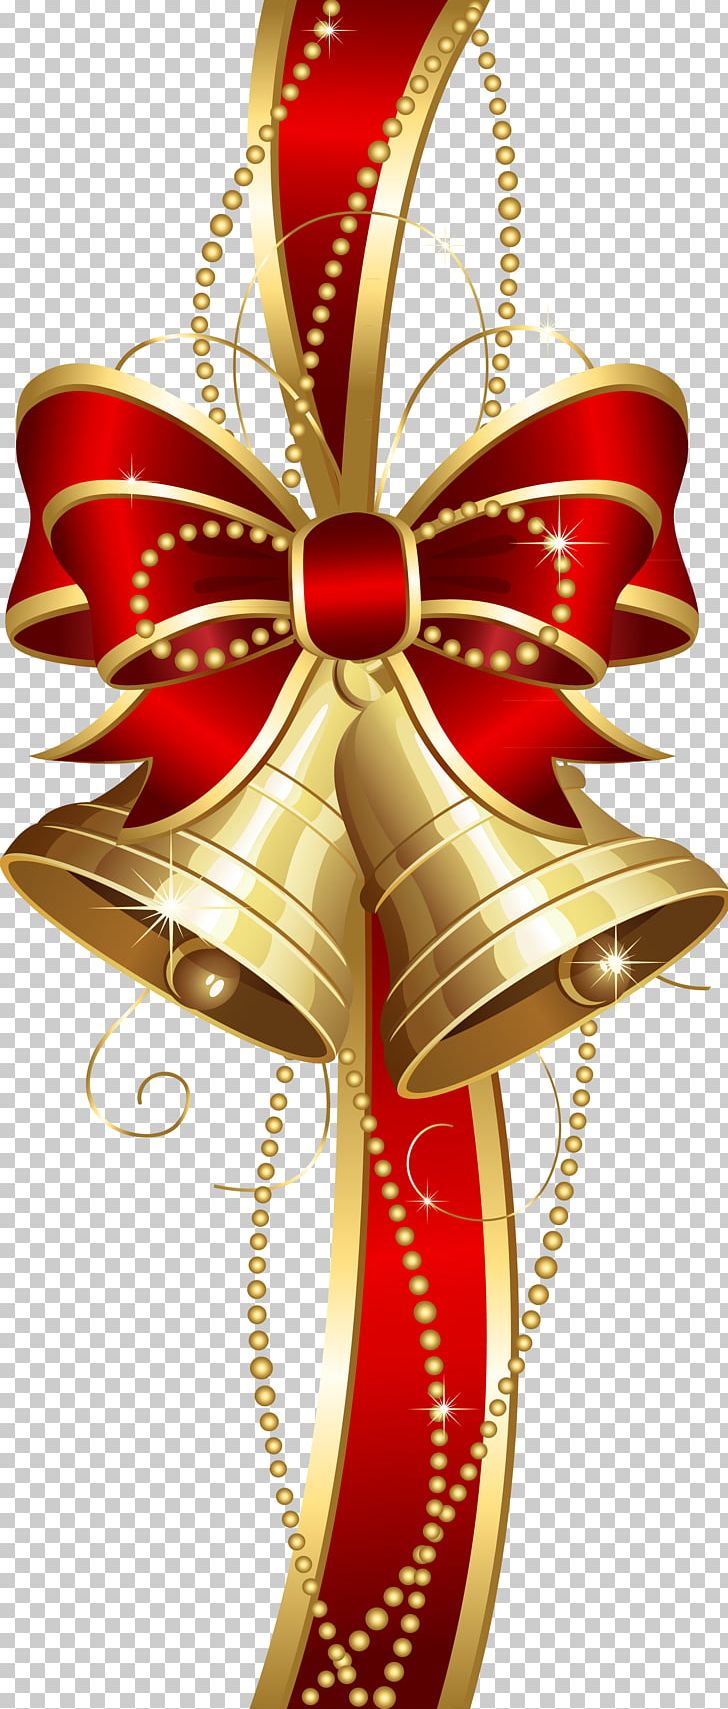 Christmas Ornament Jingle Bell PNG, Clipart, Bell, Bells, Christmas, Christmas Decoration, Christmas Ornament Free PNG Download